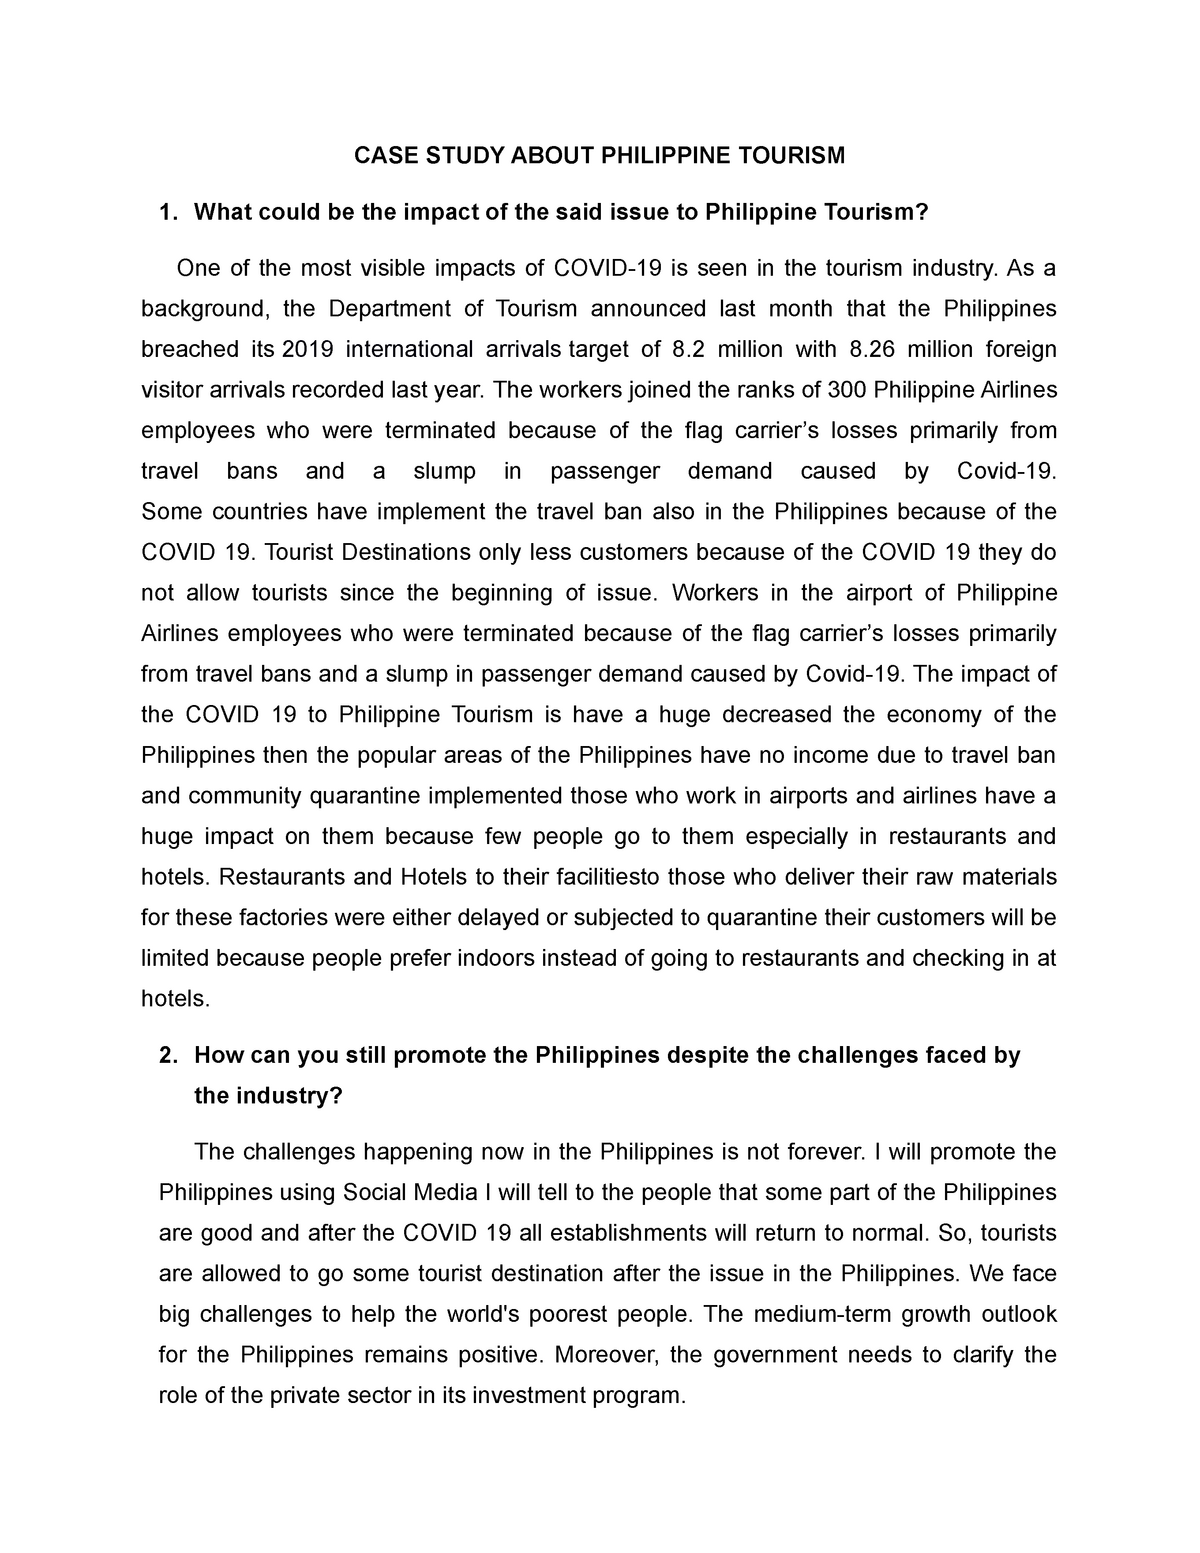 tourism planning and development in the philippines reaction paper